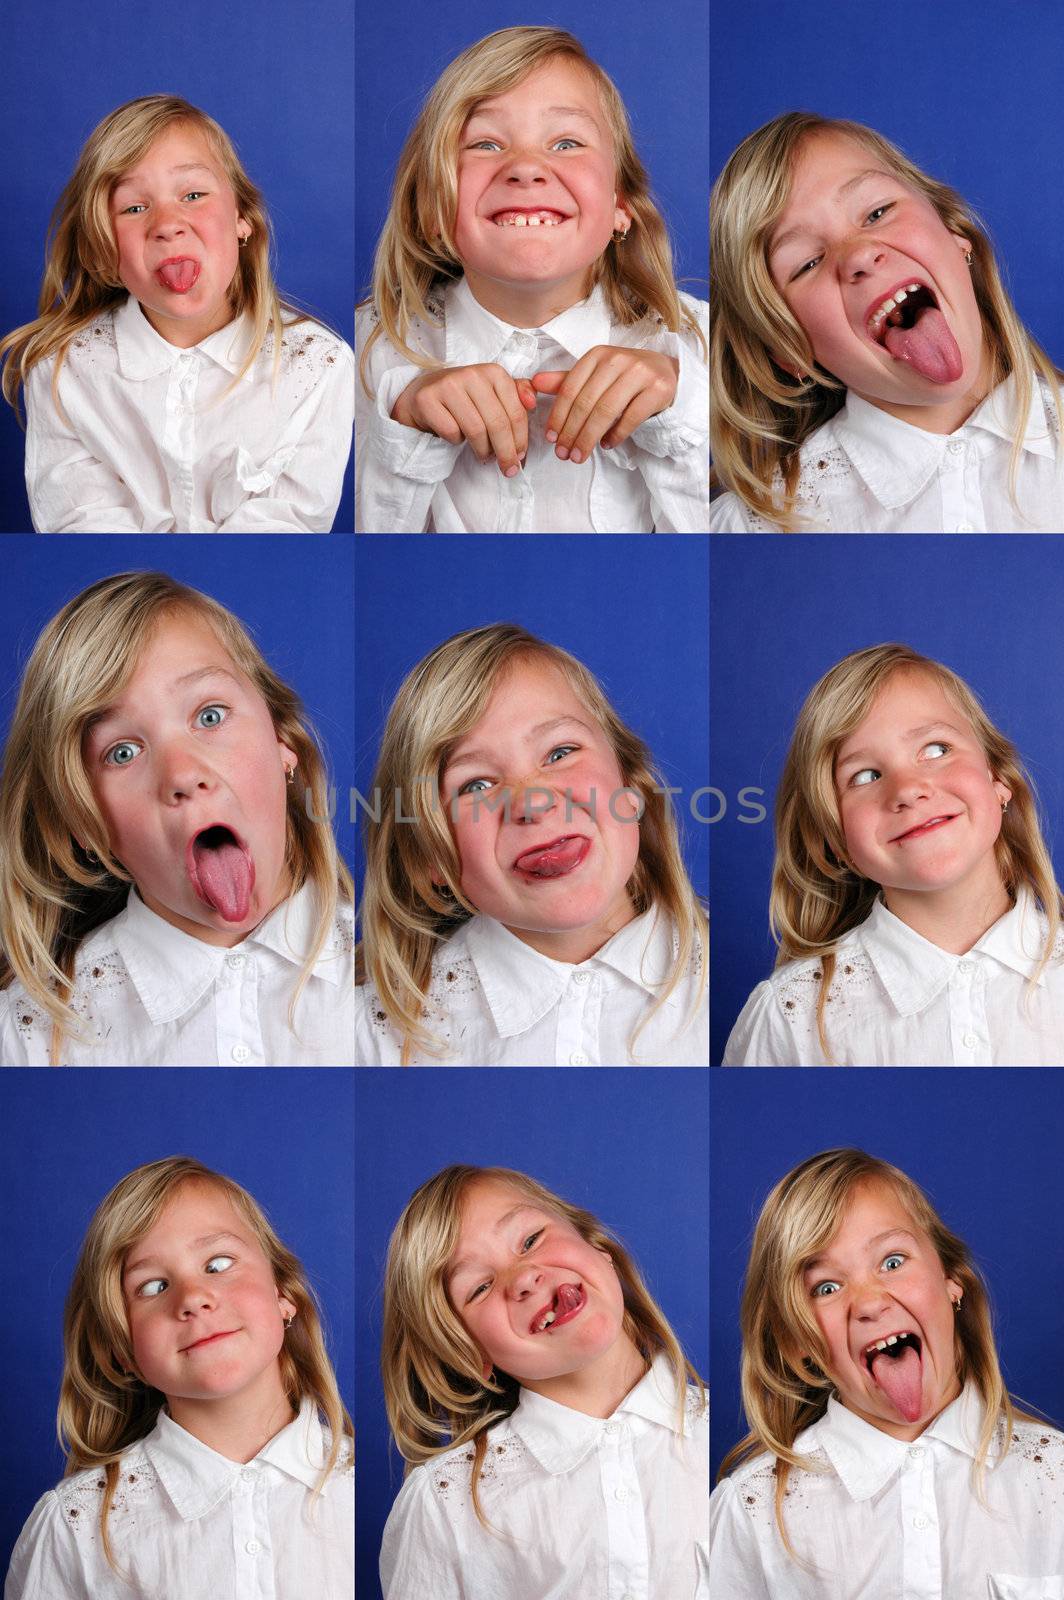 young blond girl making funny faces (9 photos in total)